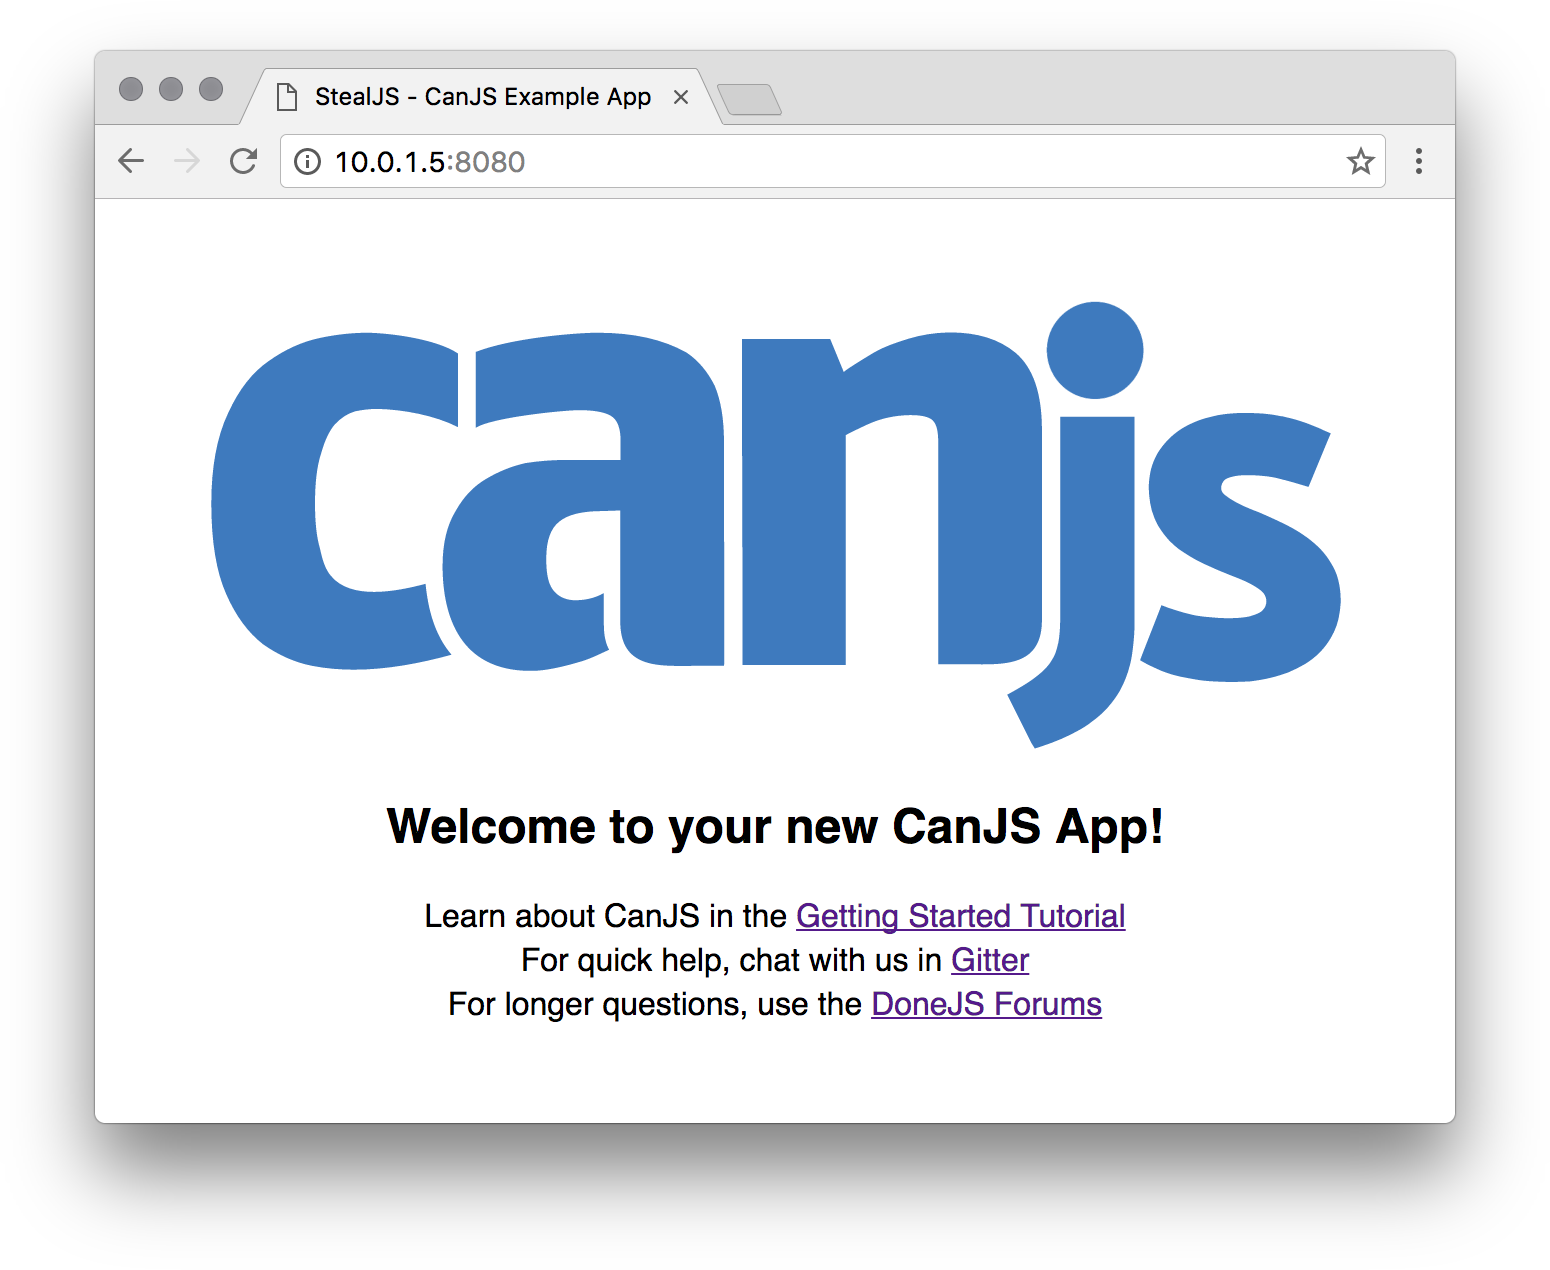 Steal-CanJS Example Screenshot